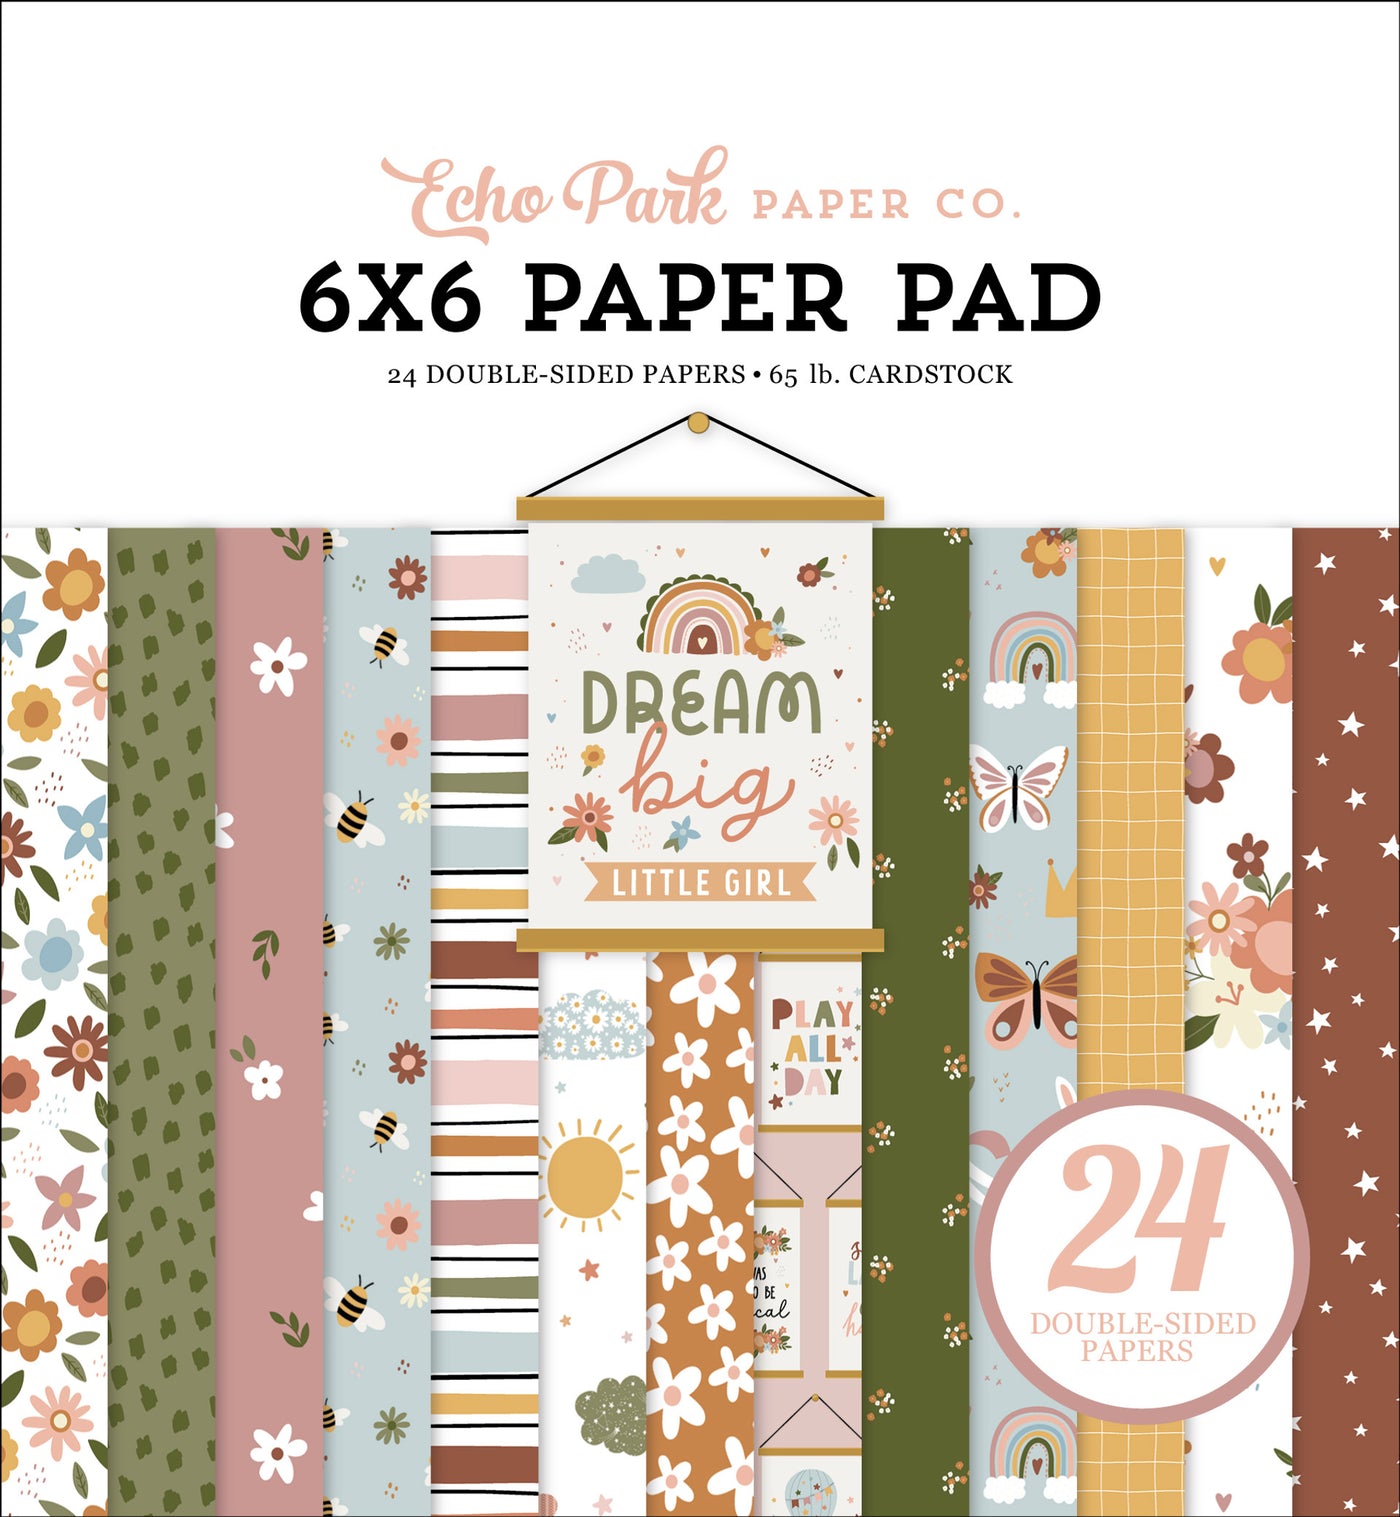 6x6 pad combines dreams, bees, rainbows, flowers, and more to celebrate your girl's life. Includes 24 double-sided pages, great for paper crafts.